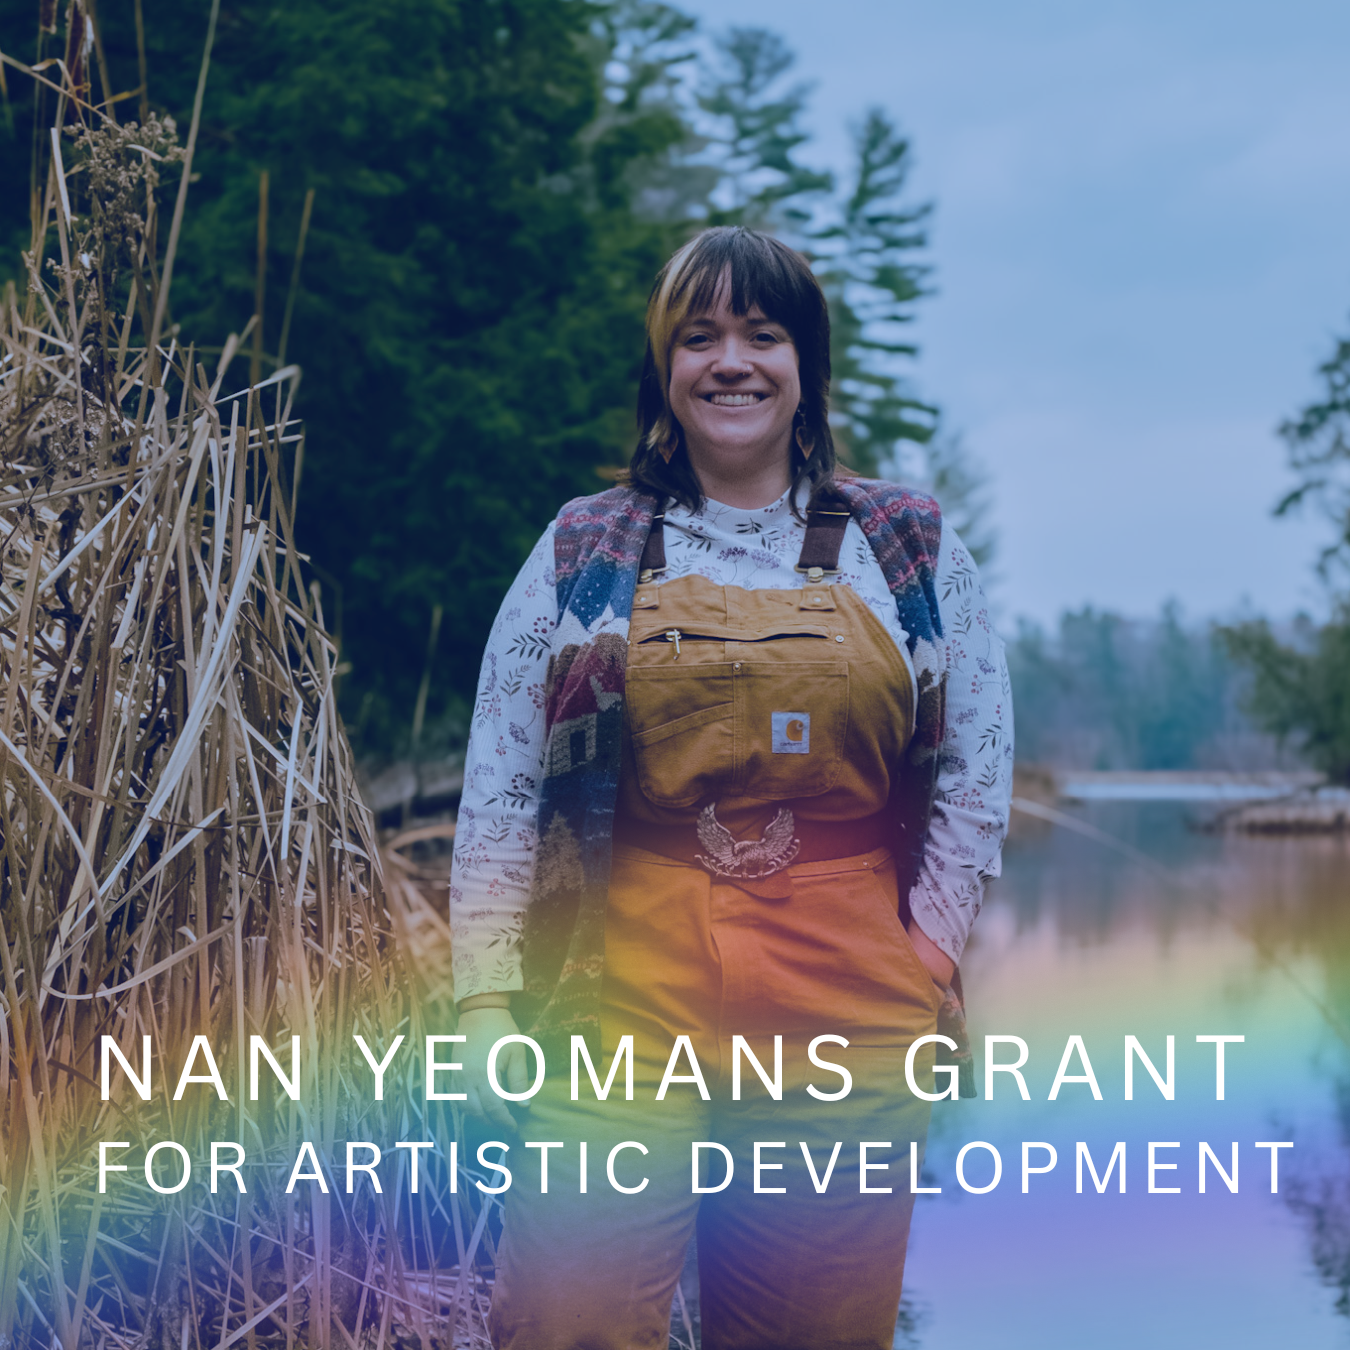 Kelsey Dawn Pearson, winner of the 2023 Nan Yeomans Grant. Photo by Maggie Whitmore.